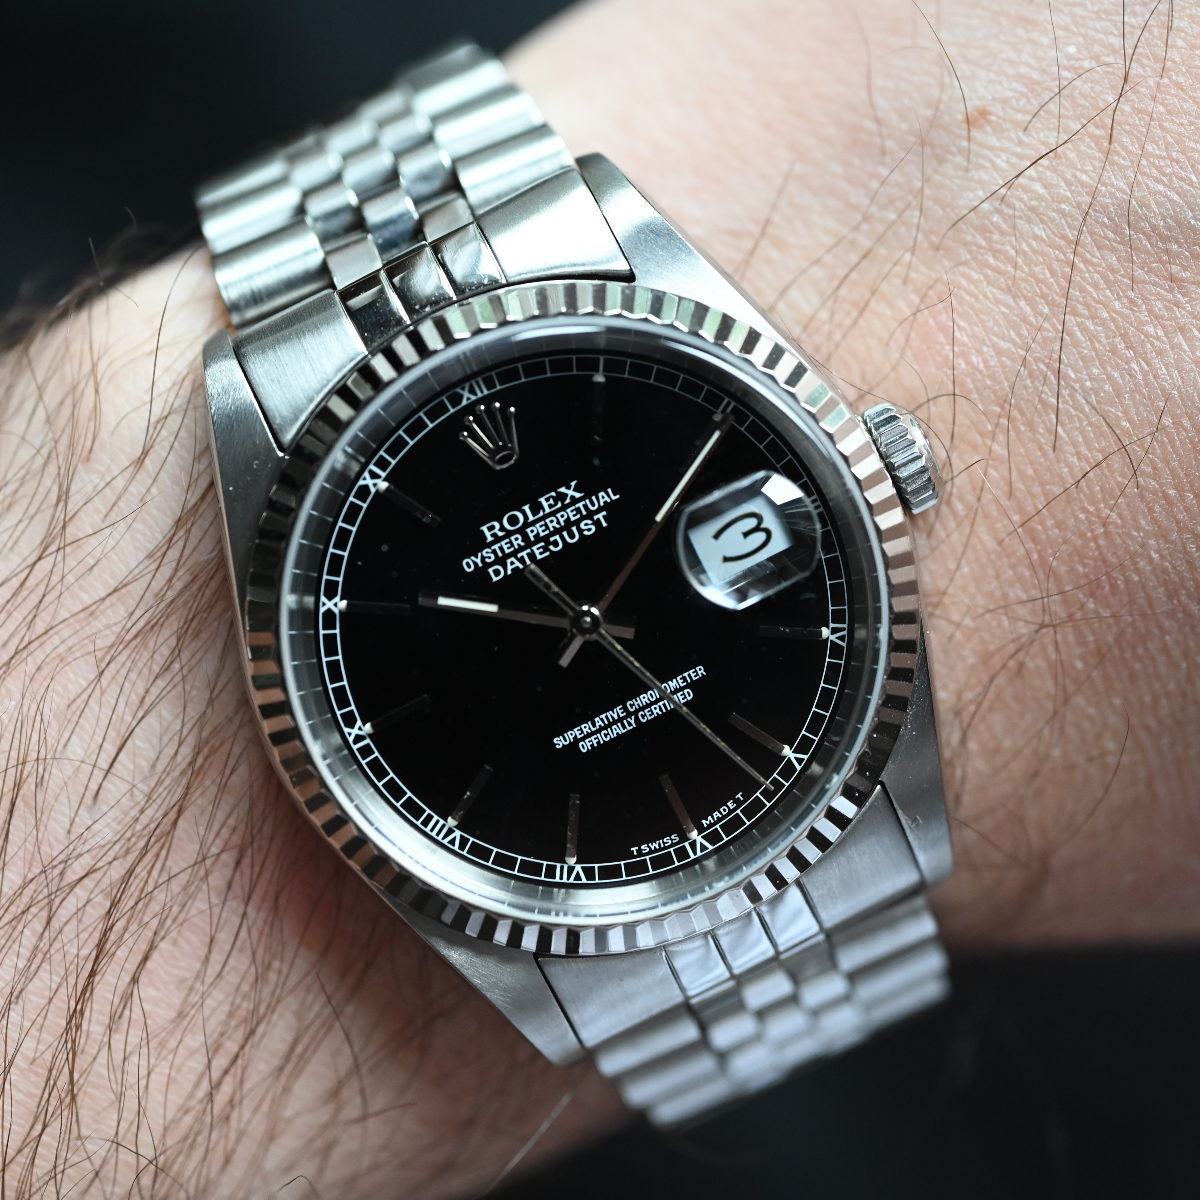 dybde specificere Sjov Owner review: Rolex 16234 DateJust - FIFTH WRIST